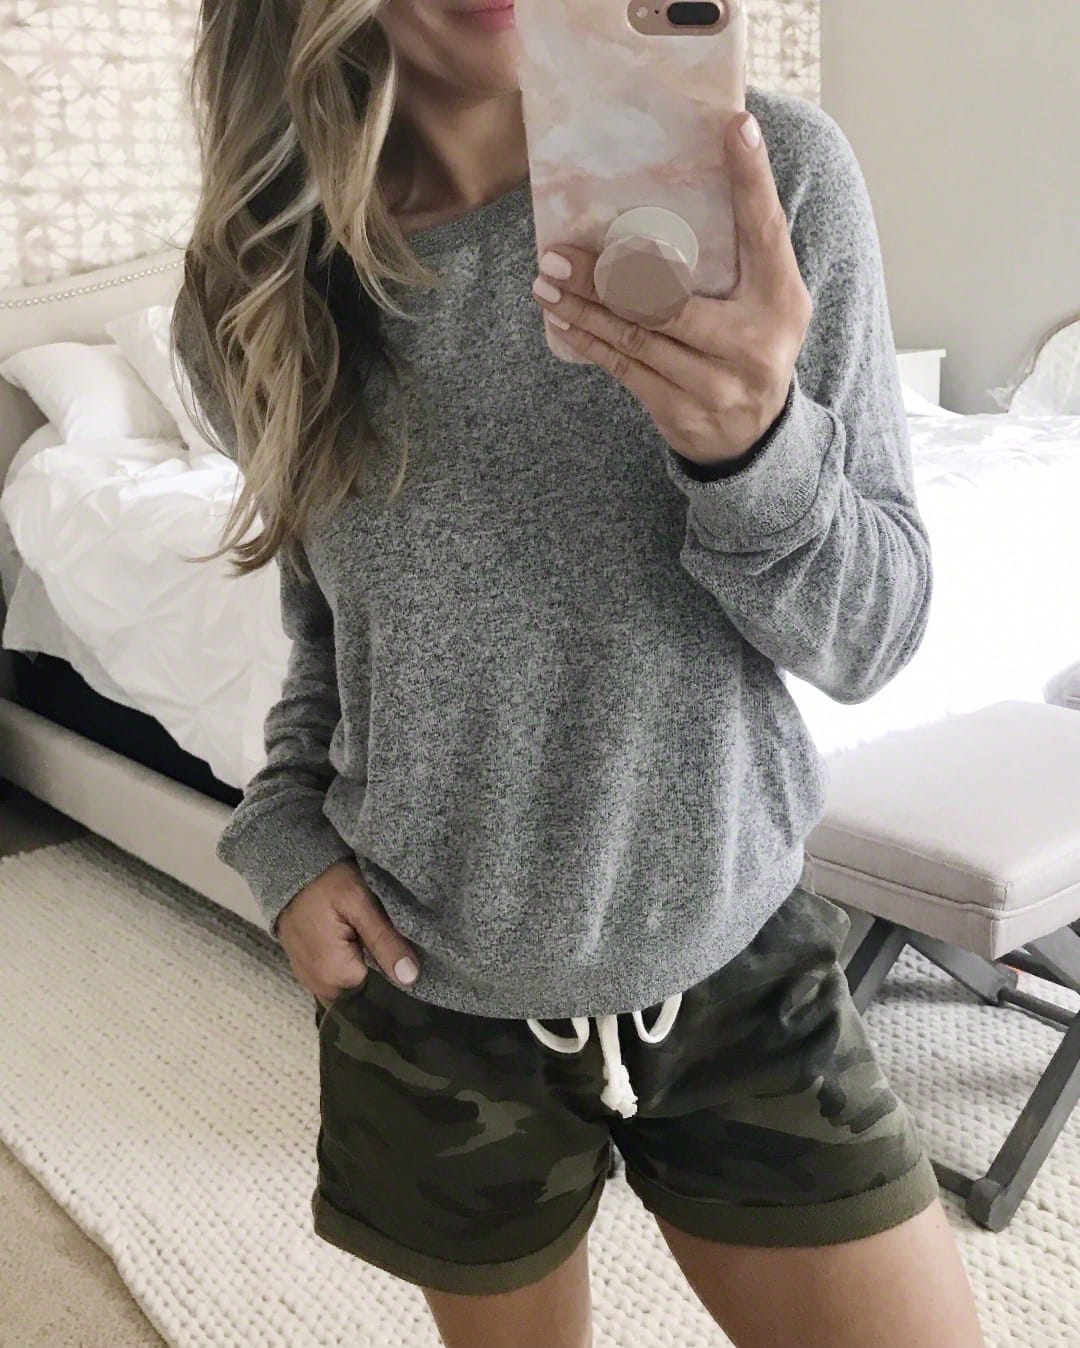 Camo shorts and grey pullover